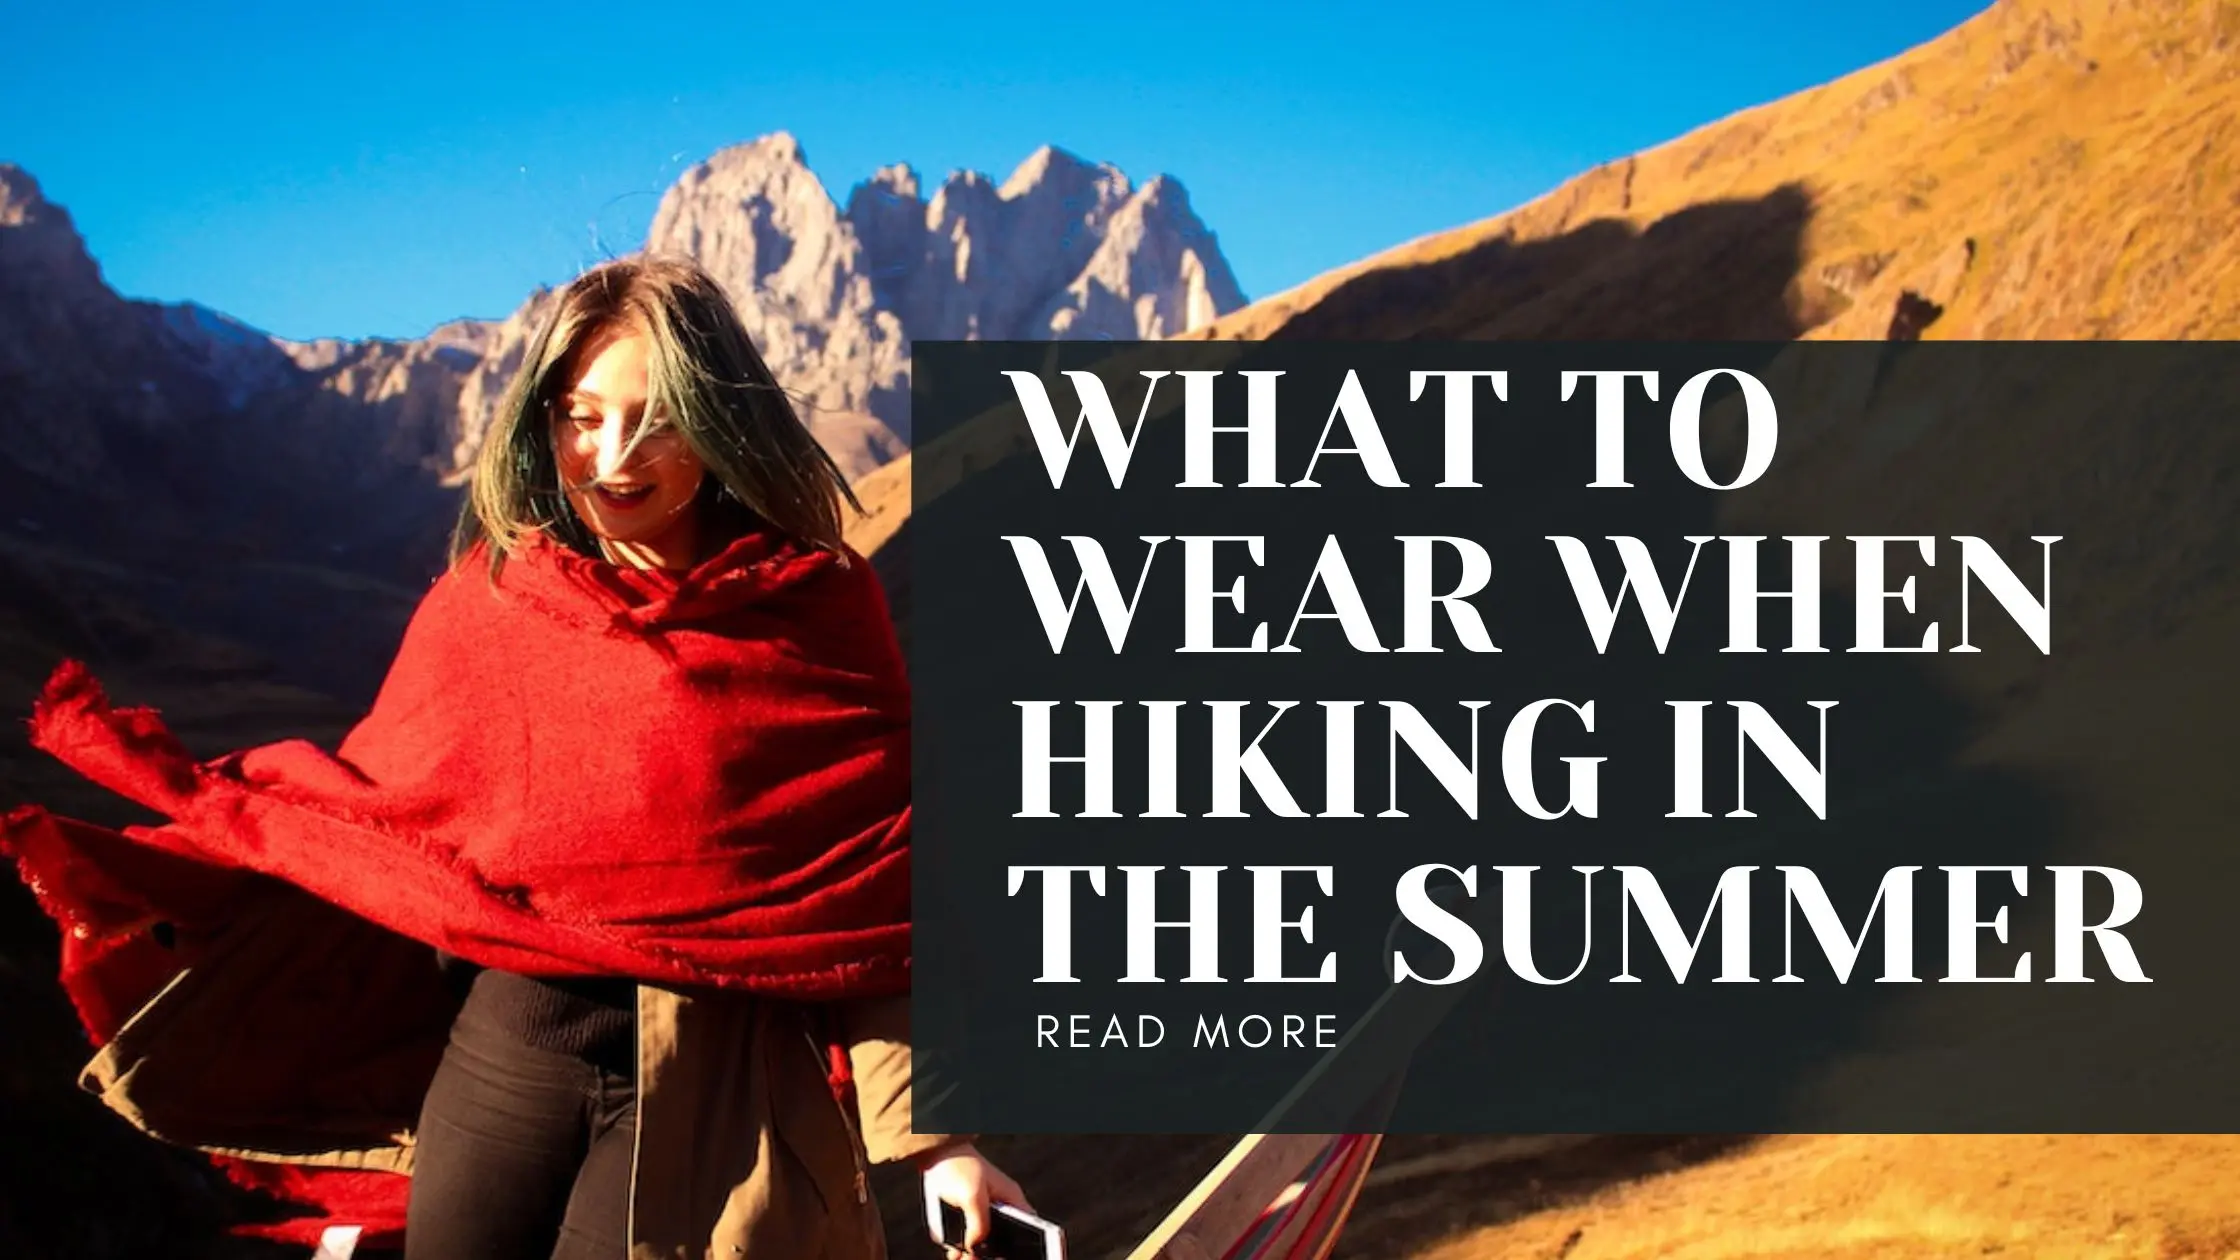 What to Wear When Hiking in the Summer